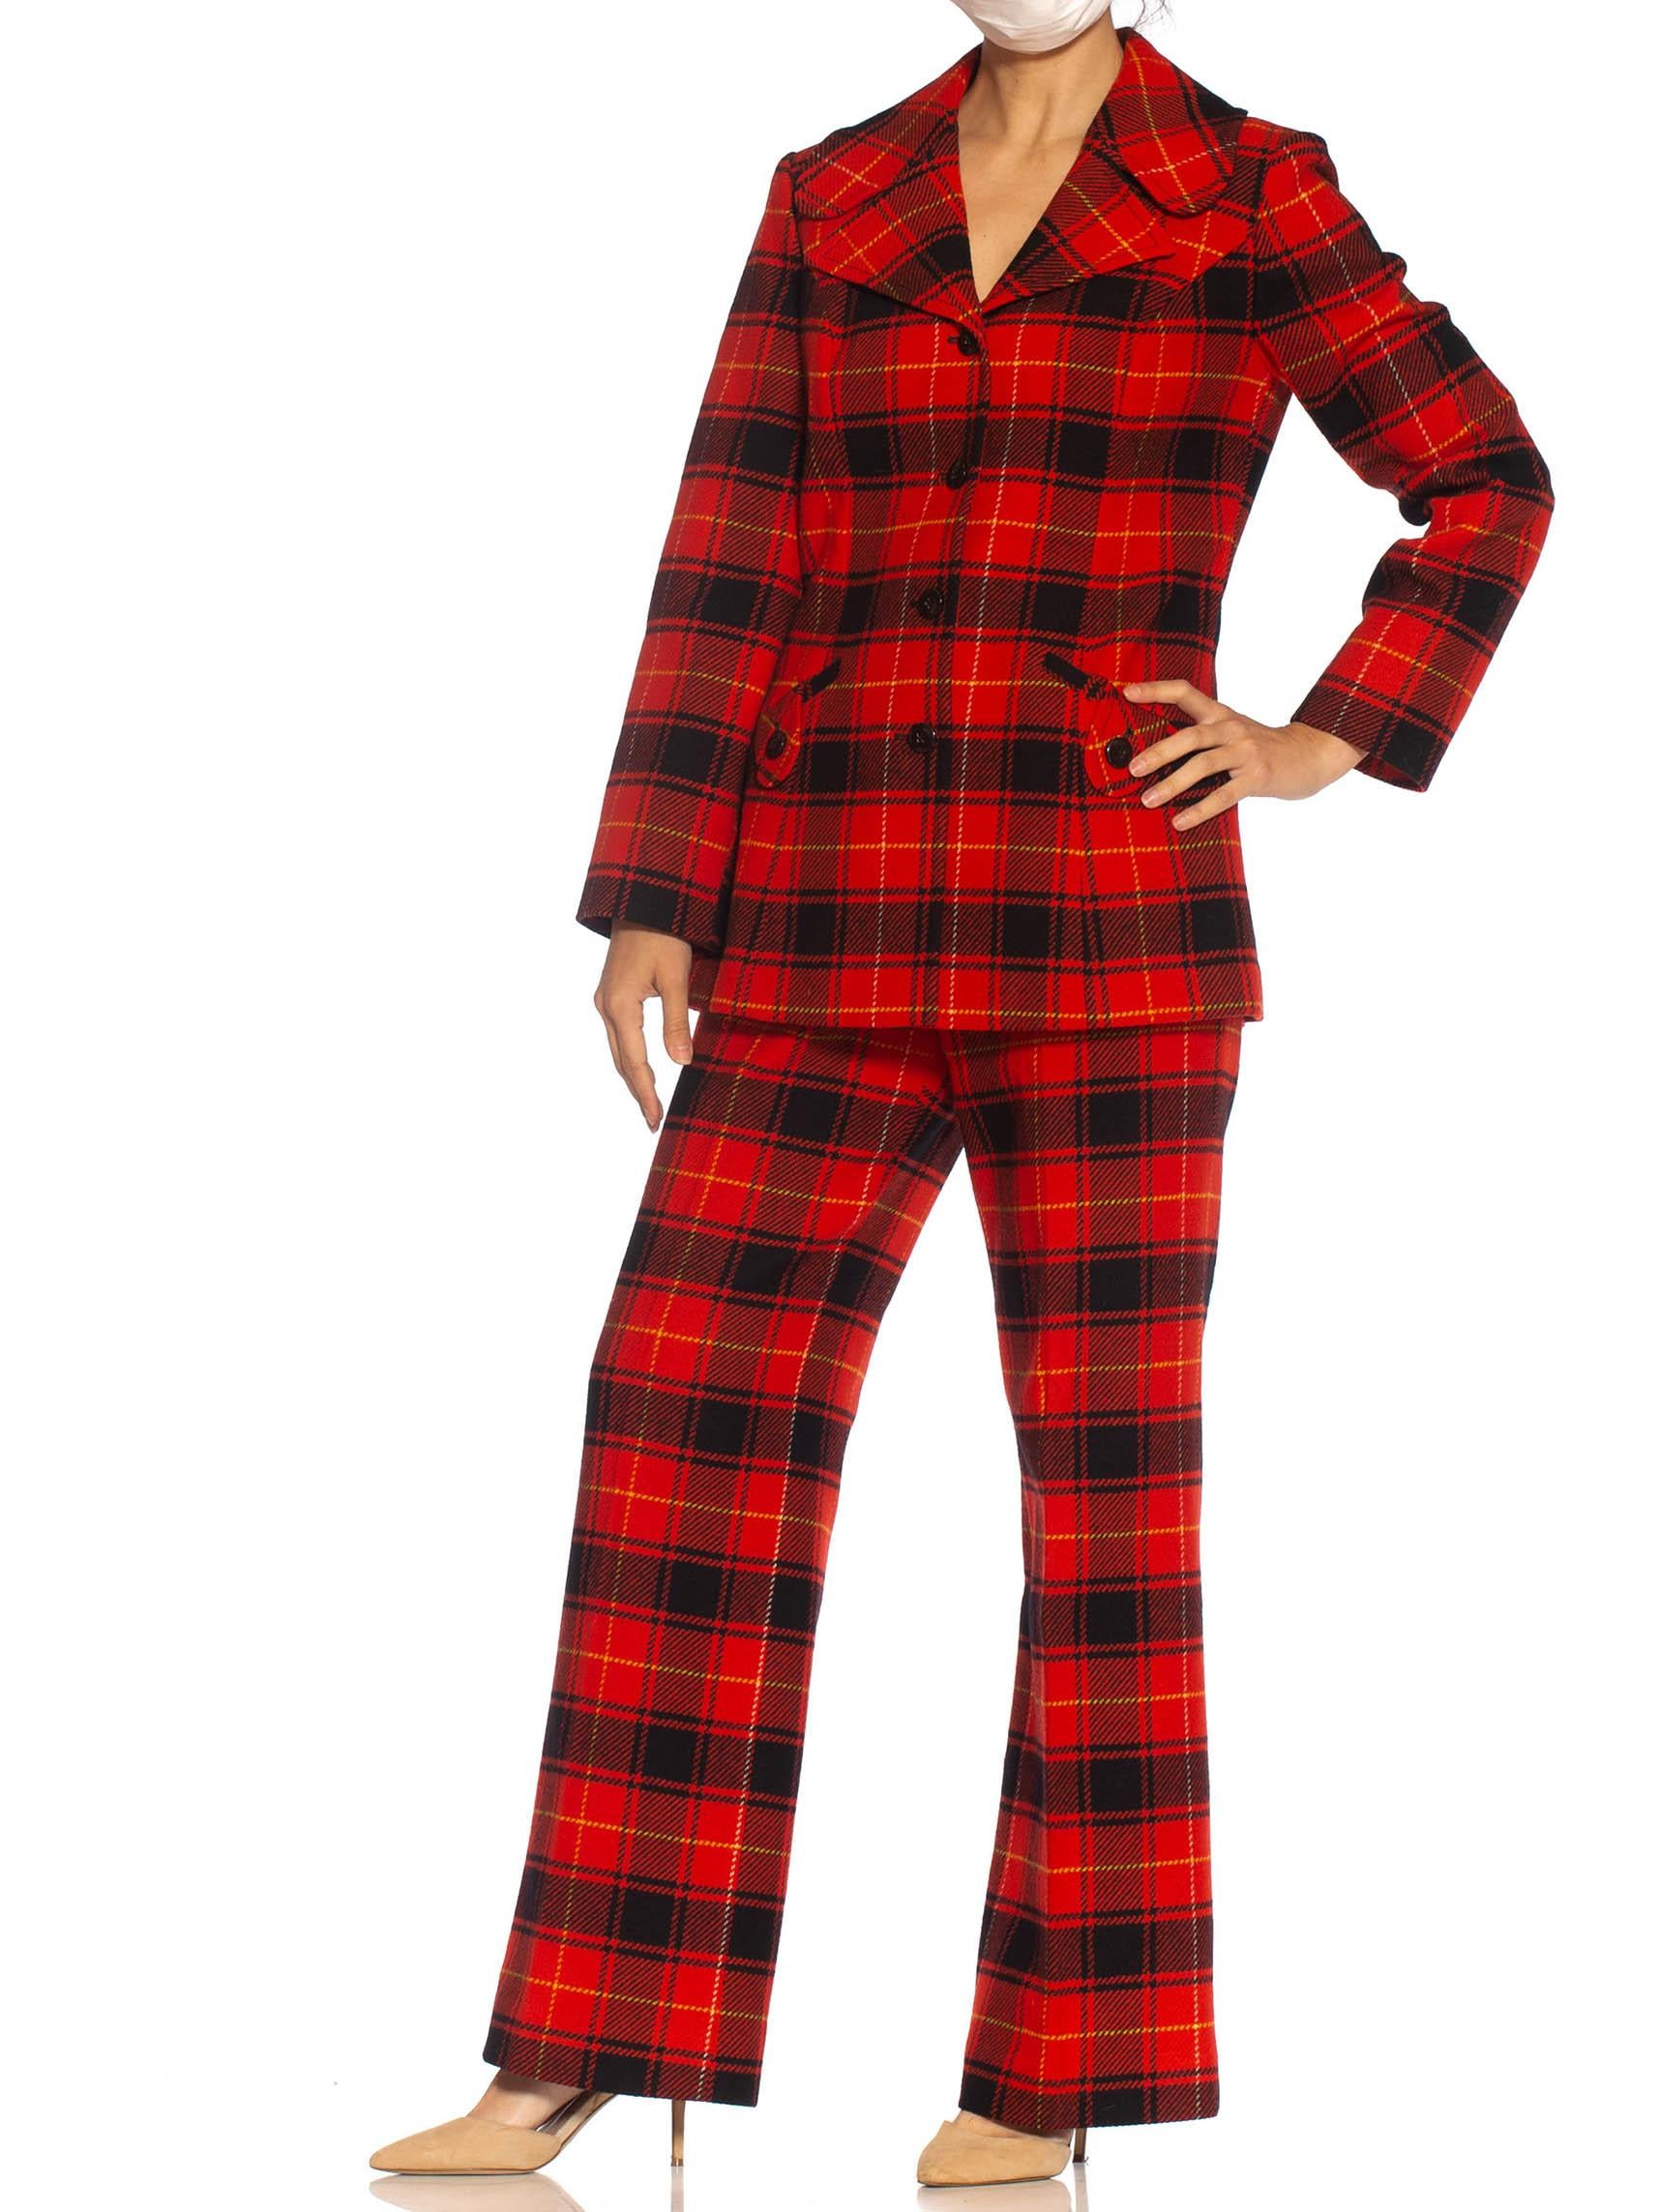 red and black plaid suit